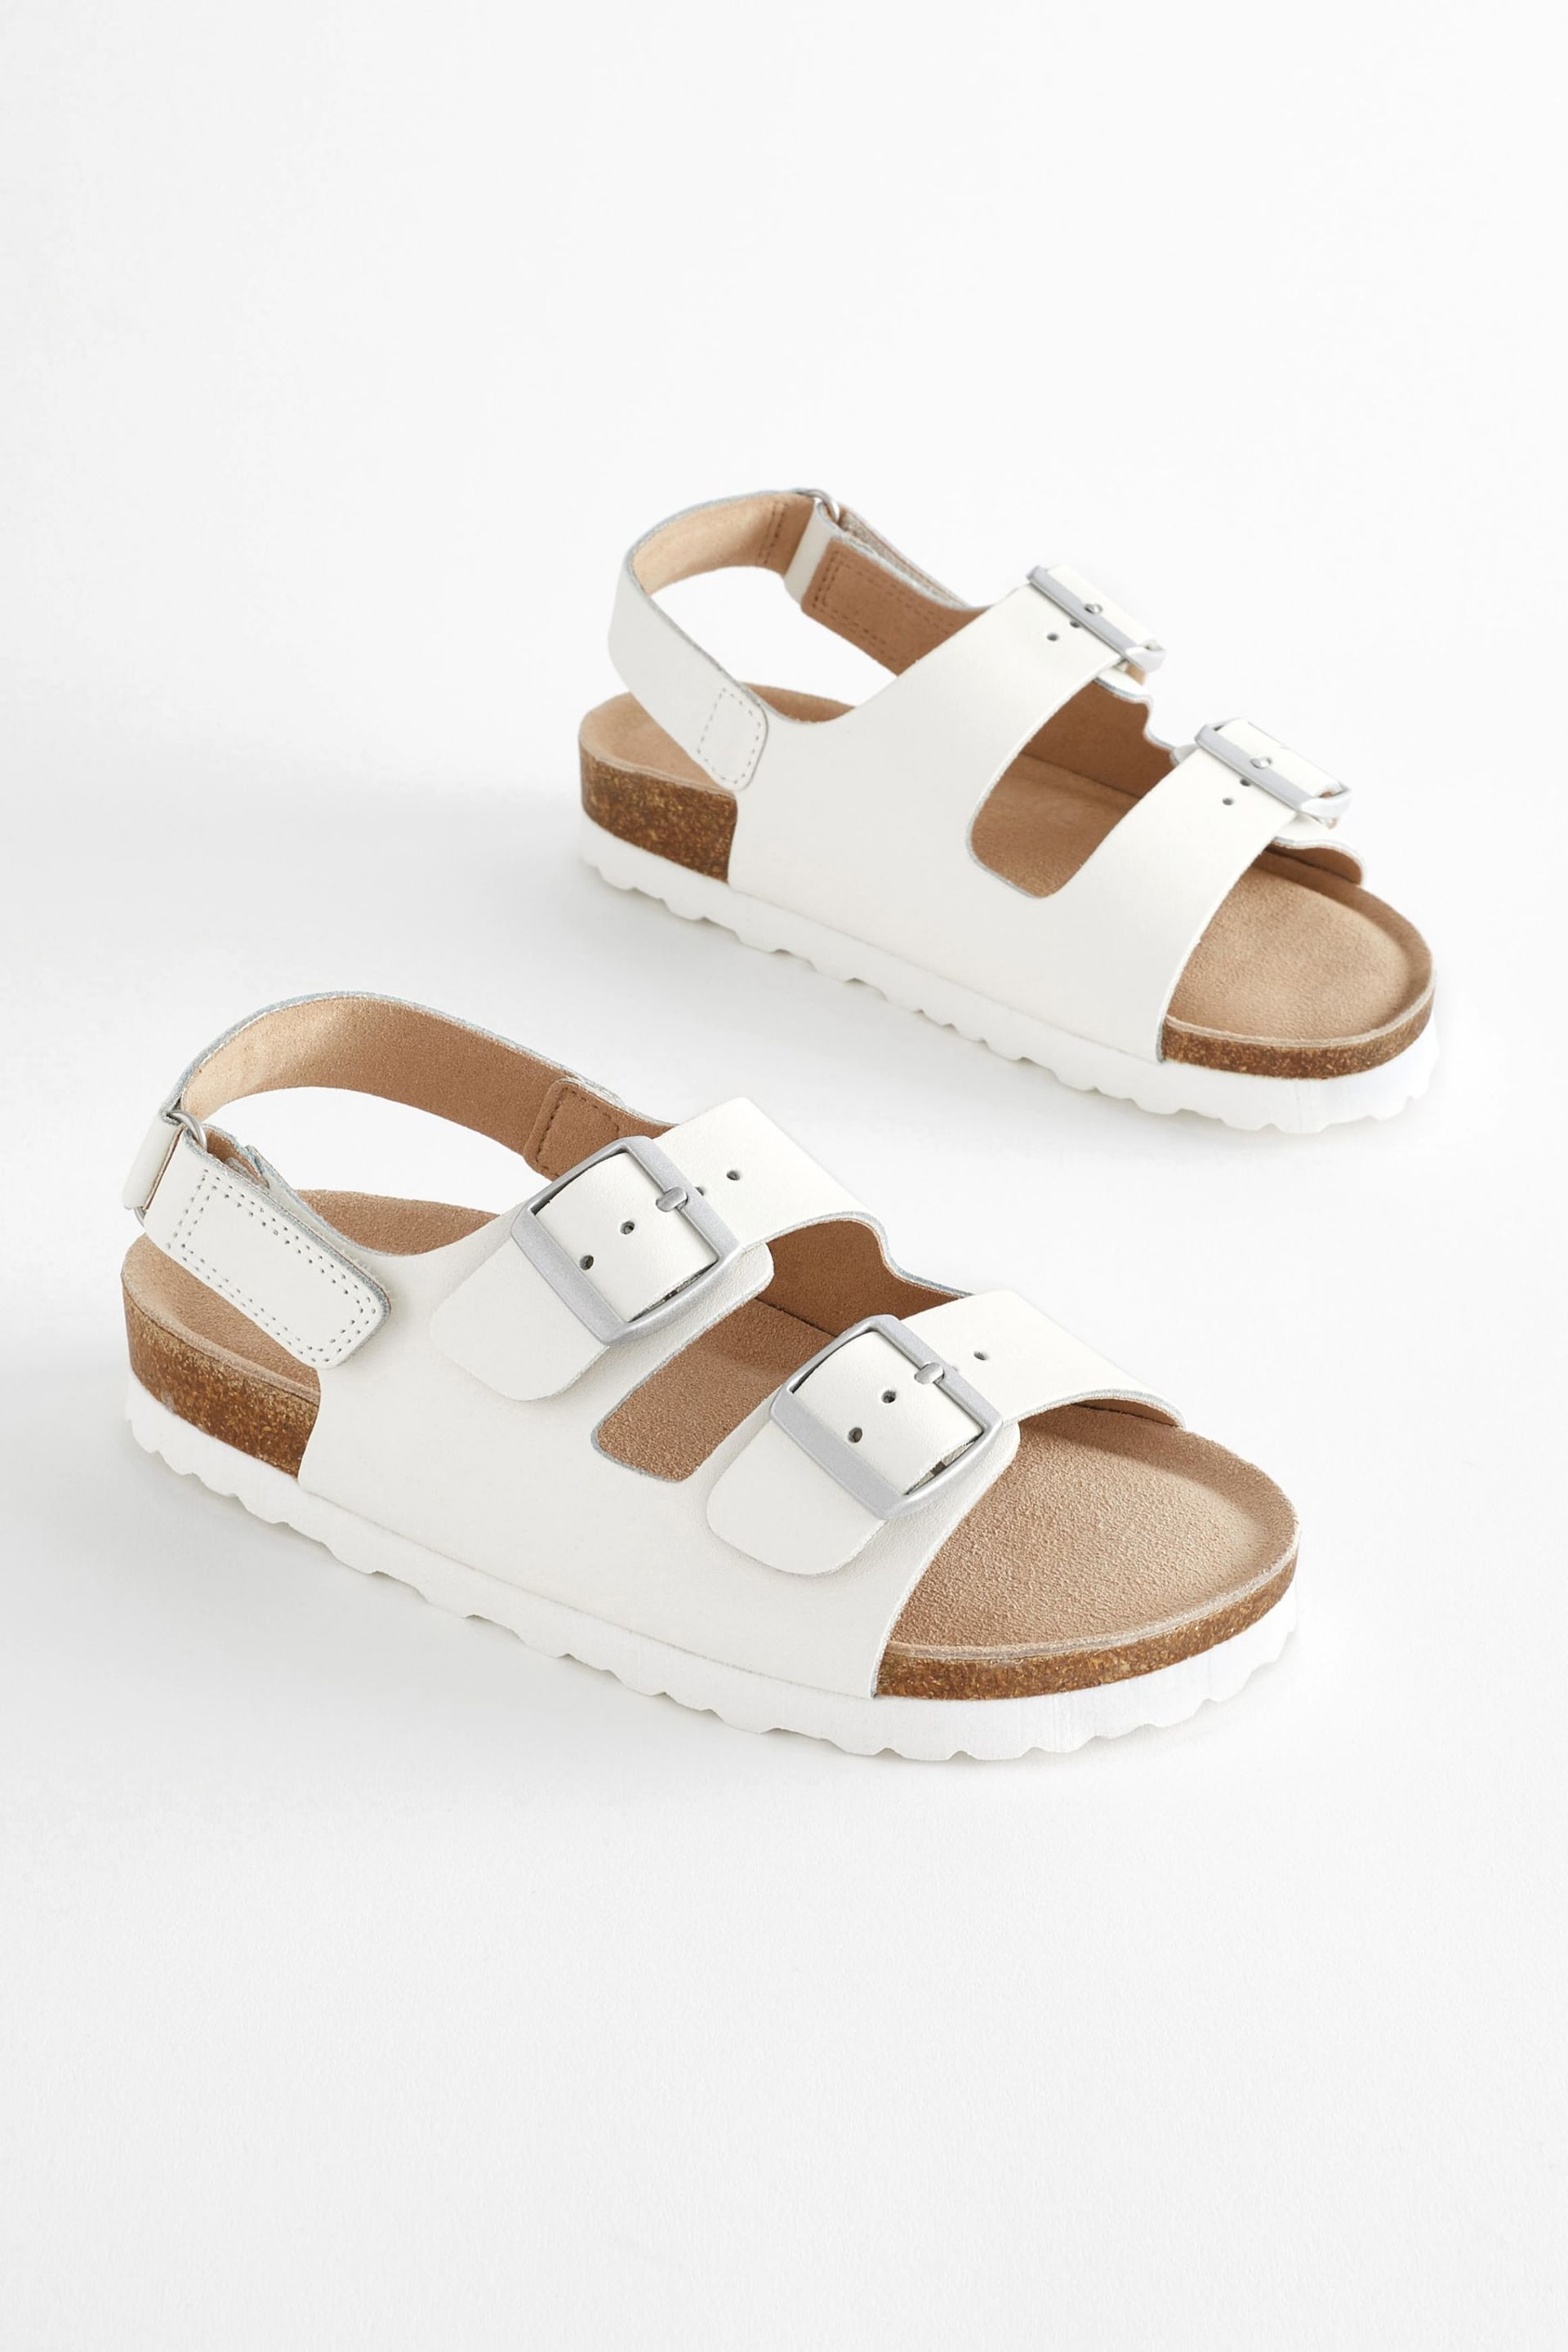 White Leather Standard Fit (F) Two Strap Corkbed Sandals - Image 4 of 9